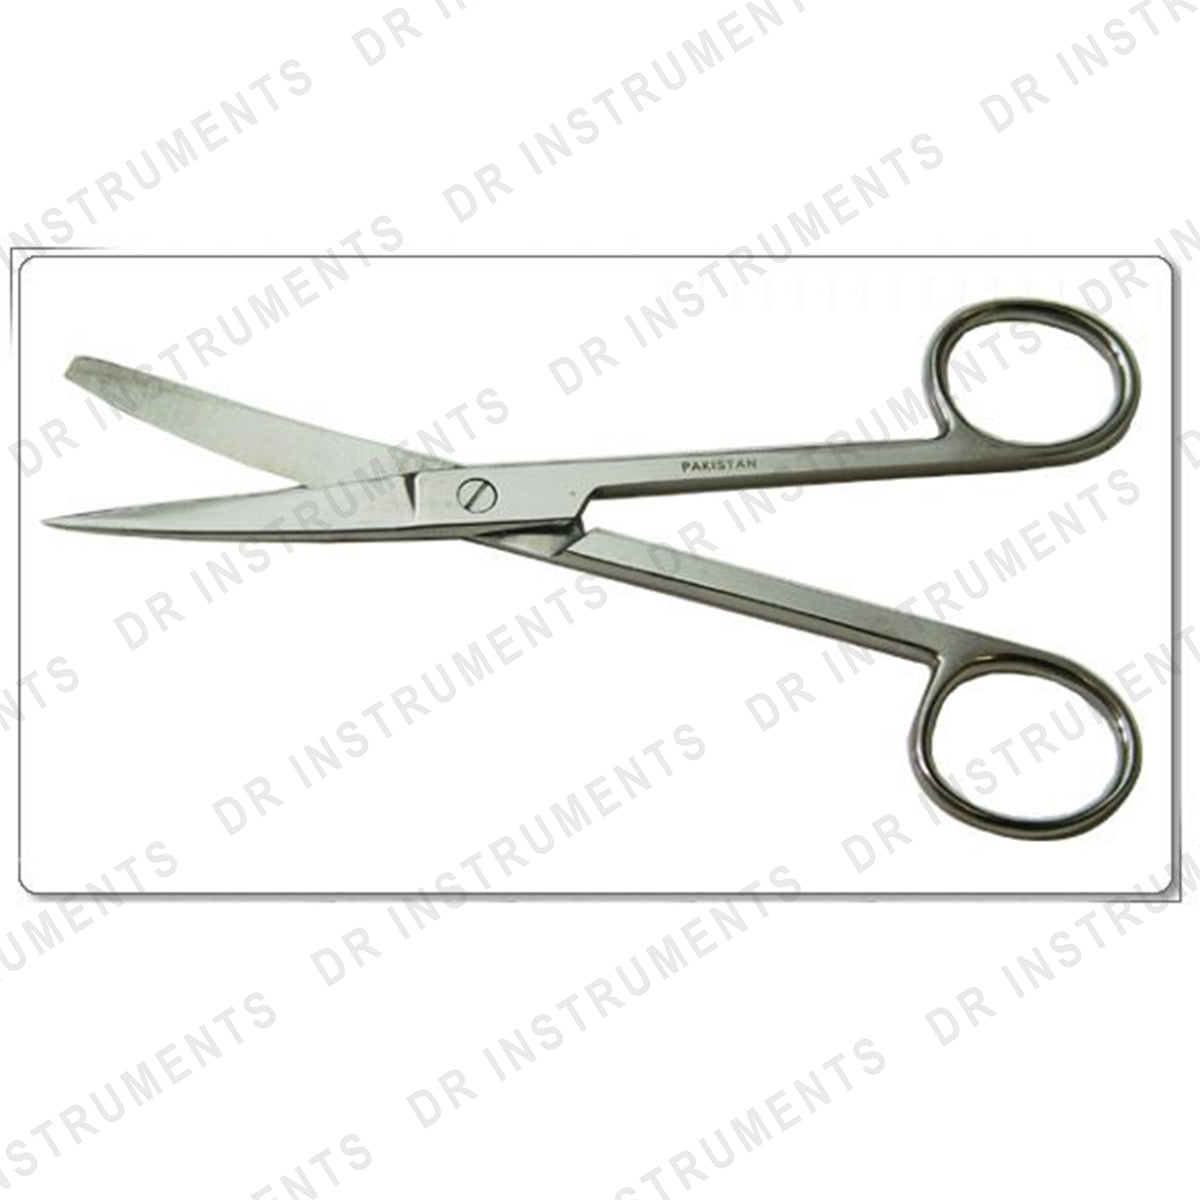 Surgical Scissors Curved, 5.5